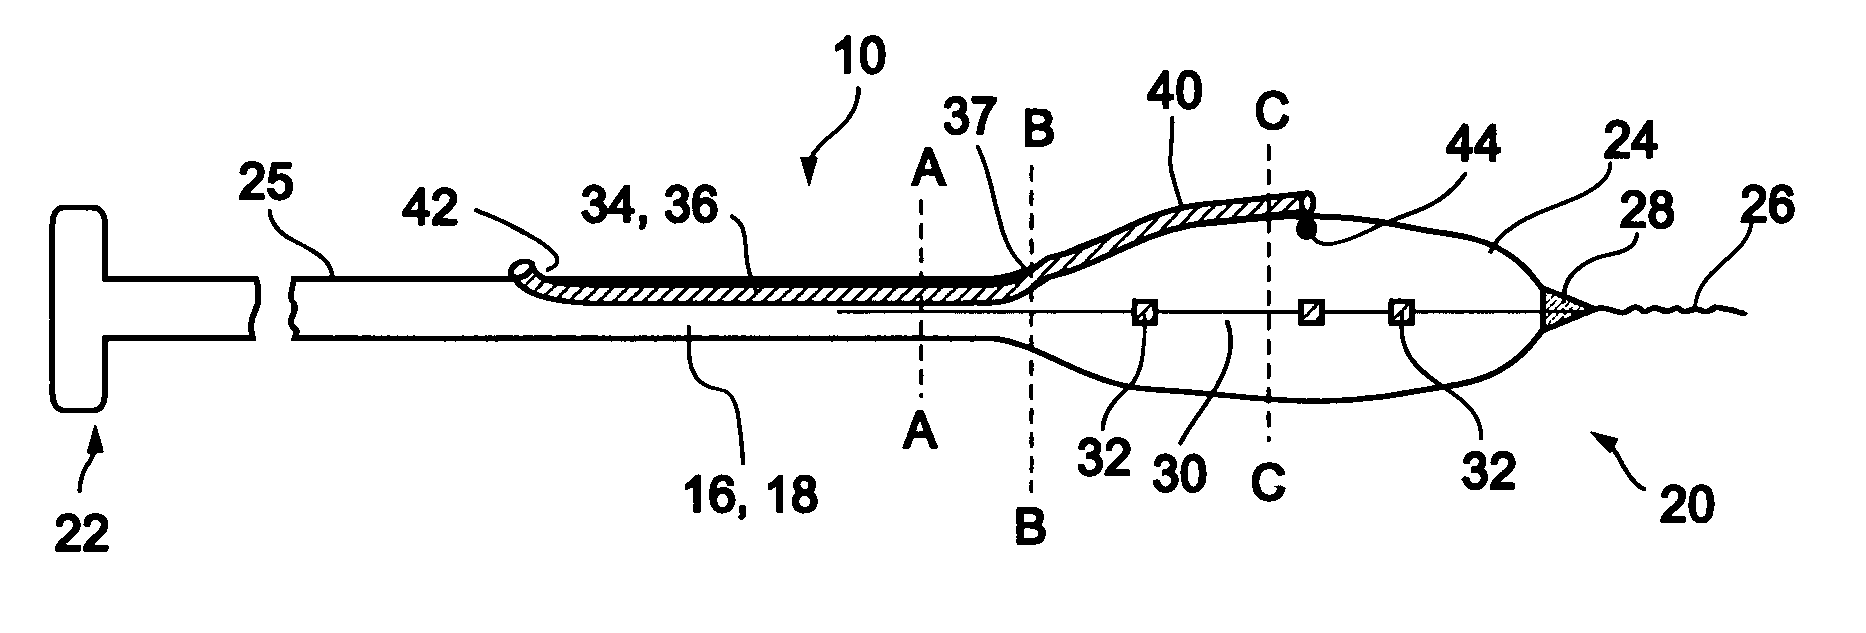 Stent delivery devices